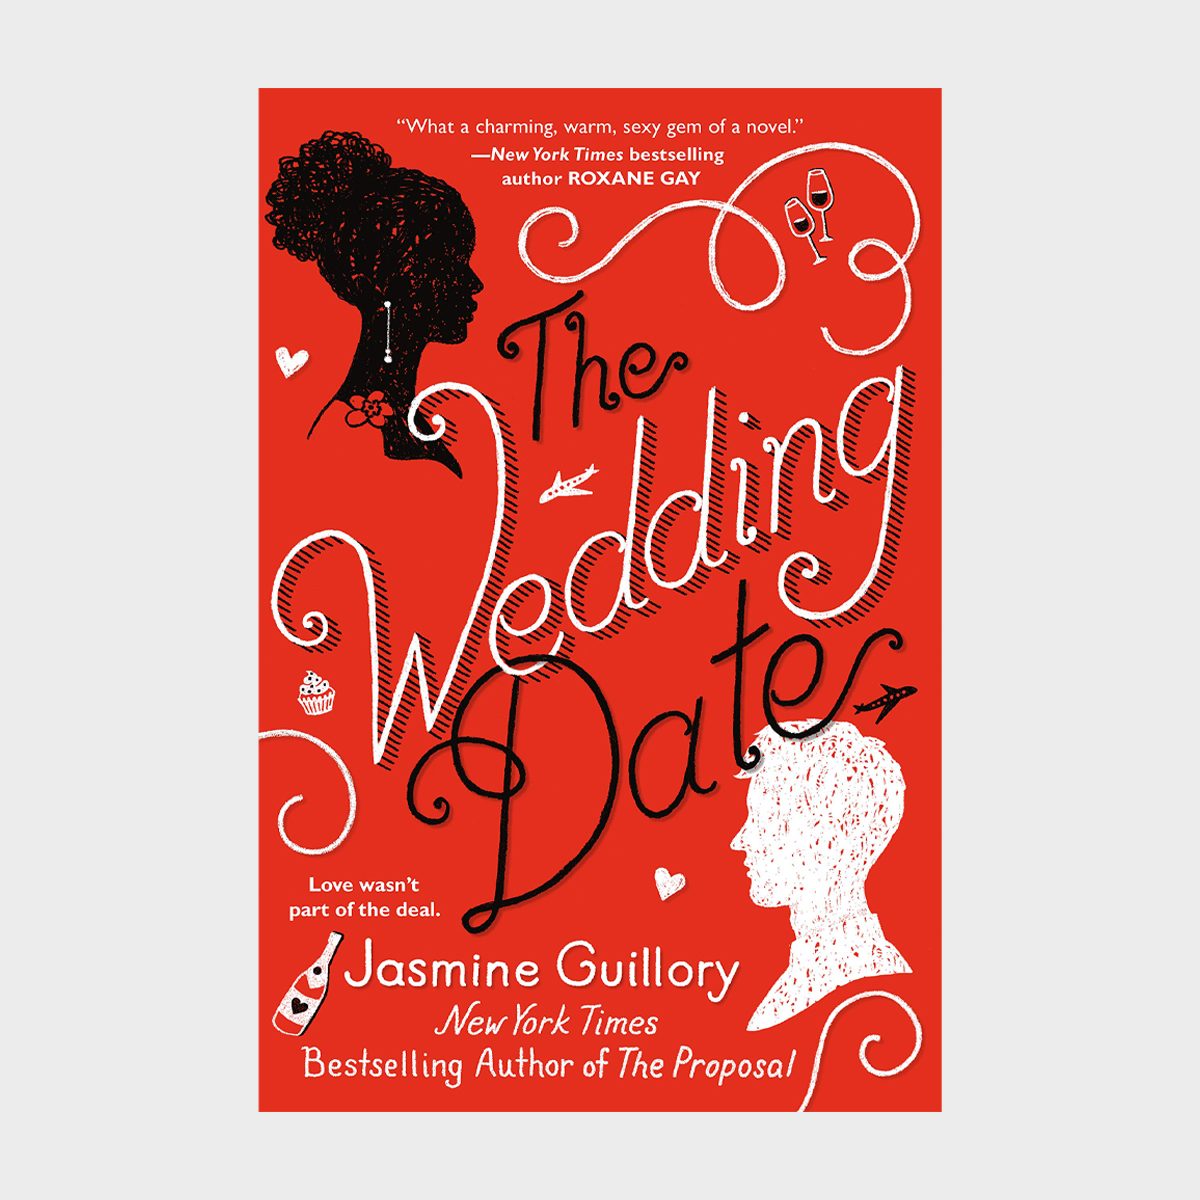 <p><strong>Series starter: </strong><a href="https://www.amazon.com/Wedding-Date-Jasmine-Guillory/dp/0399587667/" rel="noopener noreferrer"><em>The Wedding Date</em></a></p> <p><strong>What you're in for: </strong>Fake dating and real feelings</p> <p>First published in 2018, Jasmine Guillory's romance book trilogy first introduces readers to Alexa Monroe, who accidentally gets stuck in an elevator with charismatic Drew Nichols. And when he asks her if she'll play the part of his fake girlfriend at his ex's wedding? Well, she agrees. But after they have an incredible time together, they're forced to return to their real lives in separate cities. The problem is, they can't seem to stop thinking about each other. Once you've gobbled up this series (and trust us, you will), check out our <a href="https://www.rd.com/list/most-anticipated-books-this-year/" rel="noopener noreferrer">most-anticipated books</a> of the year.</p> <p class="listicle-page__cta-button-shop"><a class="shop-btn" href="https://www.amazon.com/Wedding-Date-Jasmine-Guillory/dp/0399587667/">Shop Now</a></p>